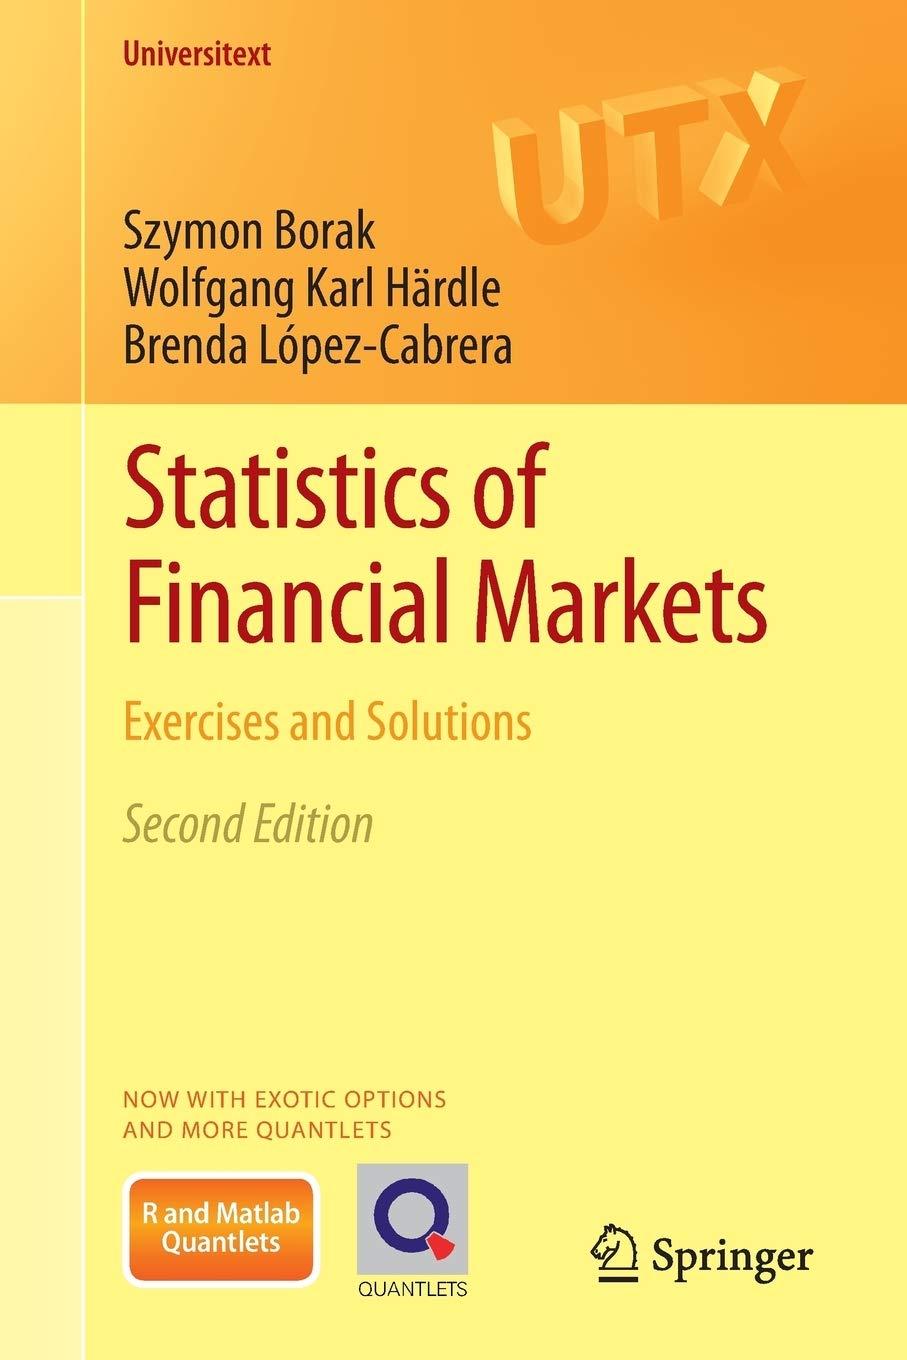 statistics of financial markets exercises and solutions 2nd edition szymon borak, wolfgang karl härdle,